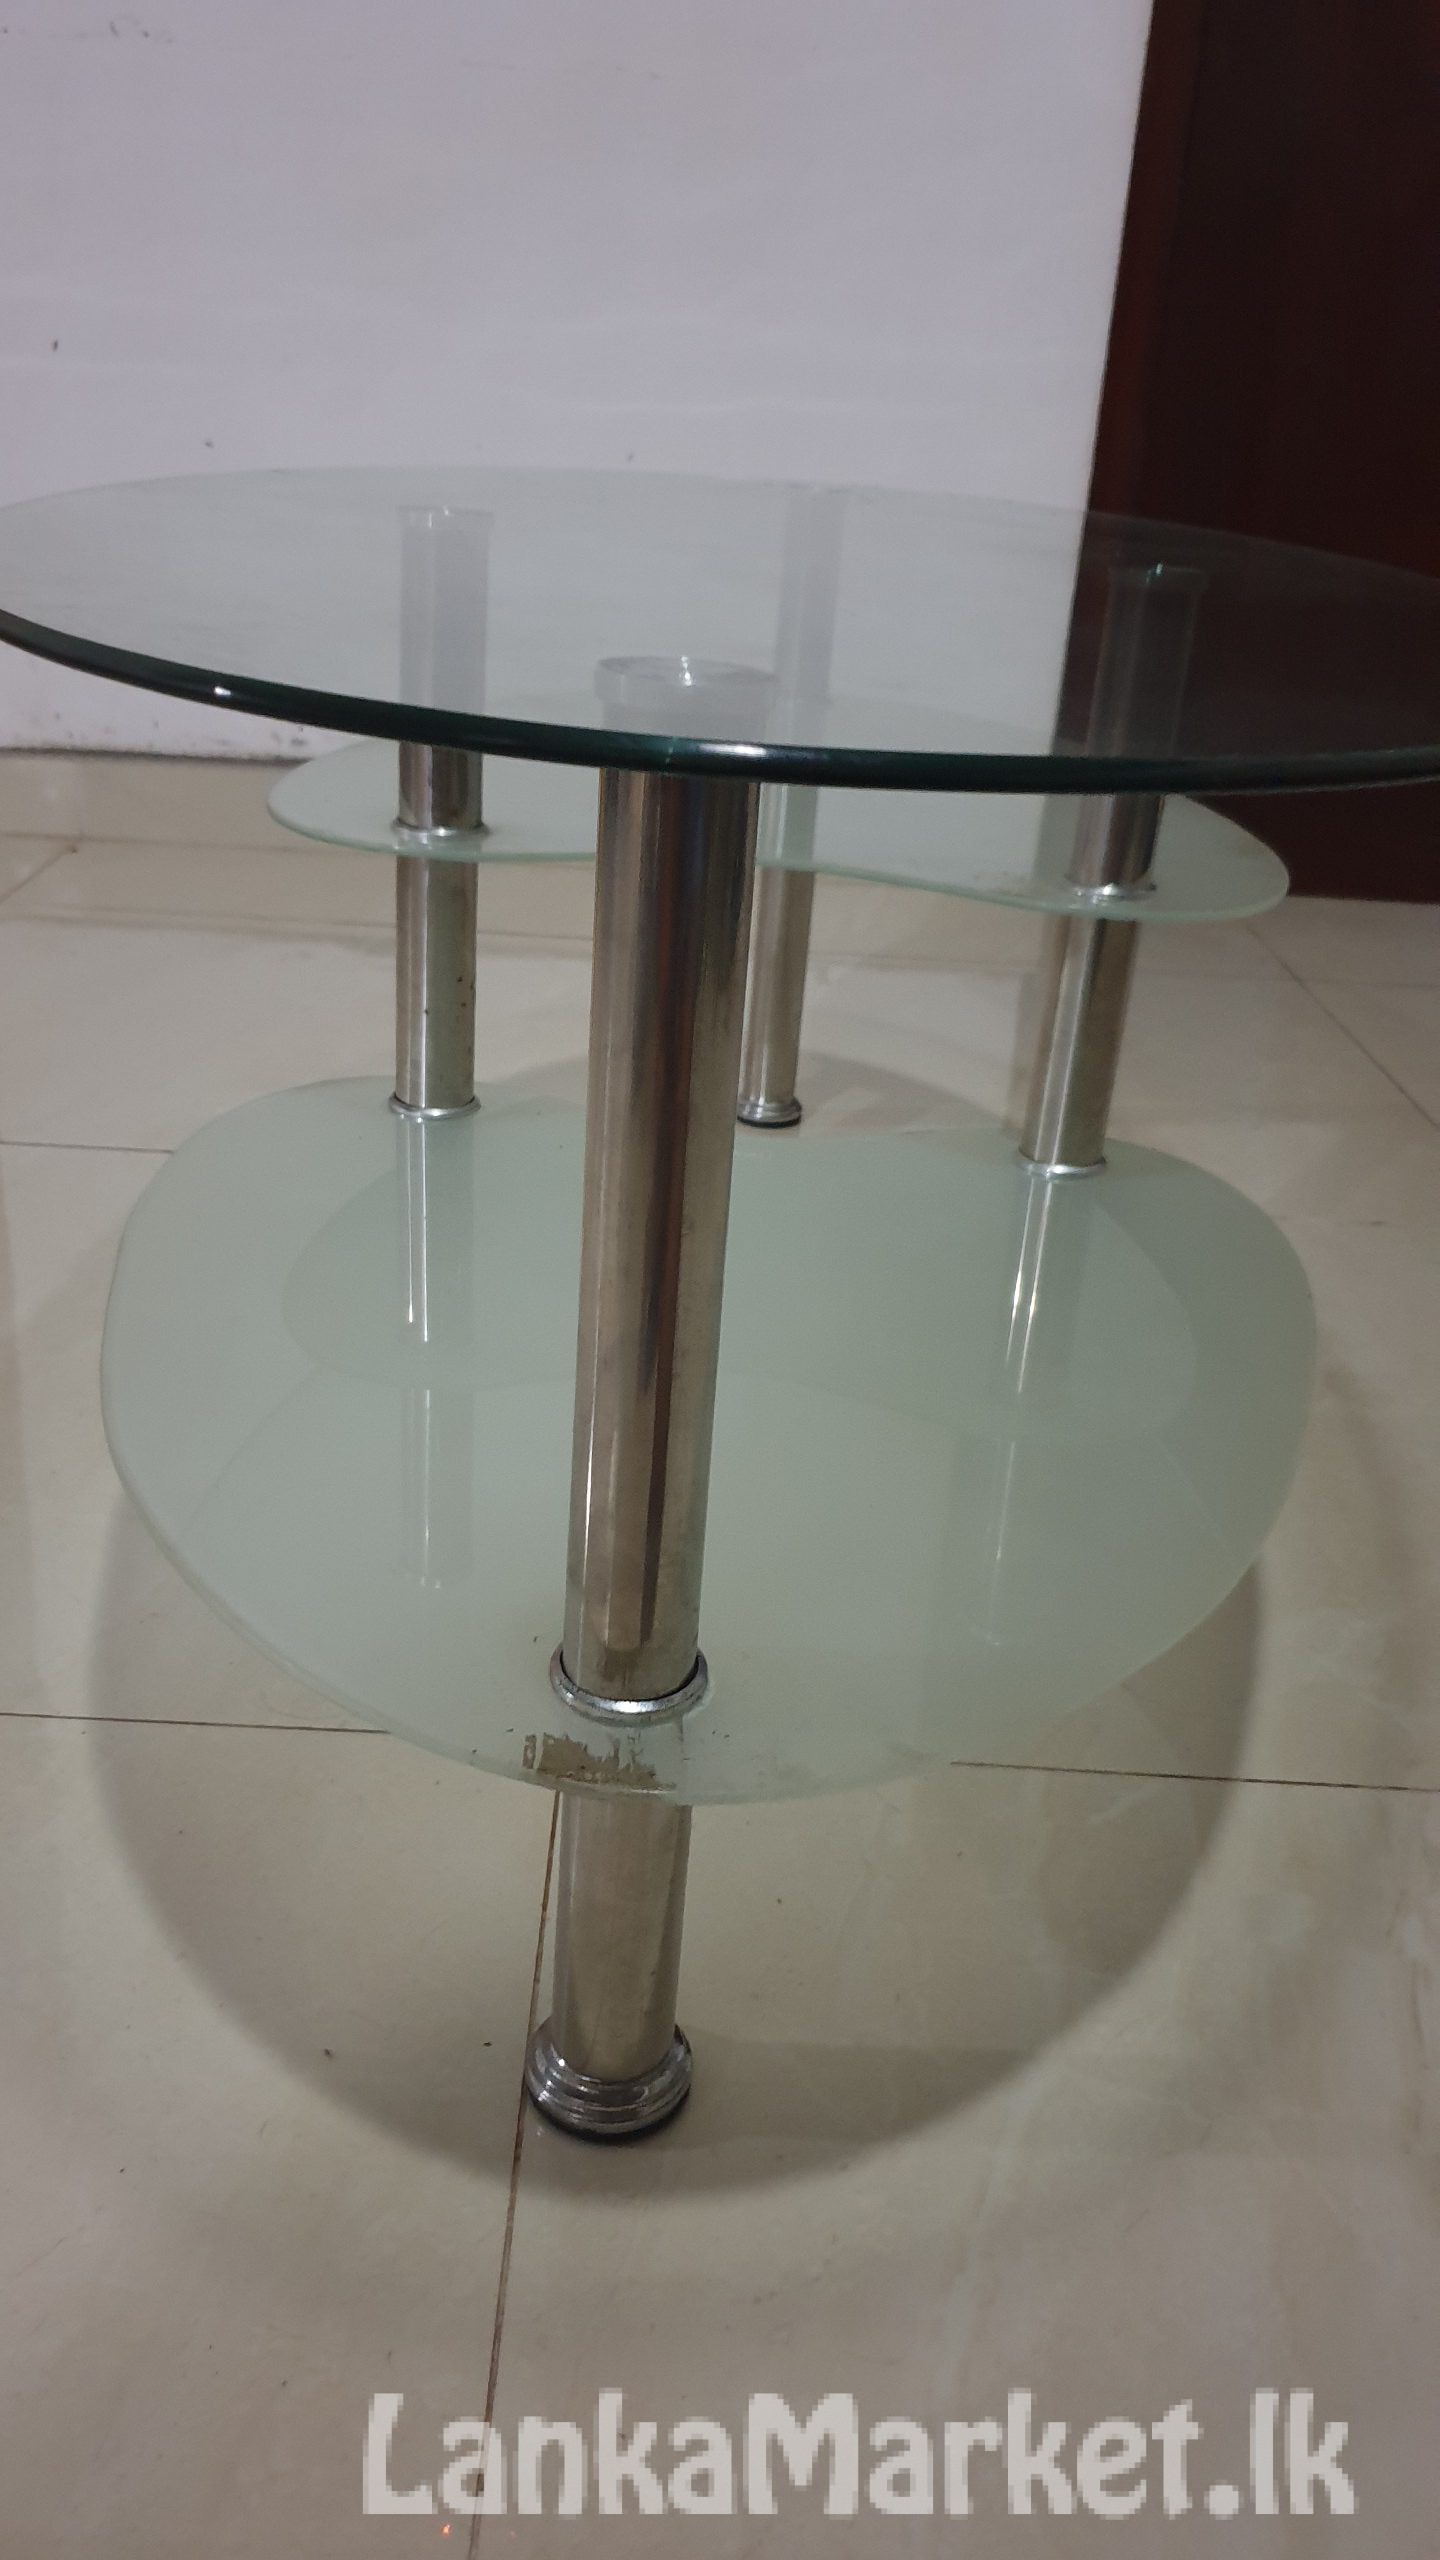 Used glass dining table and glass coffee table for sale.